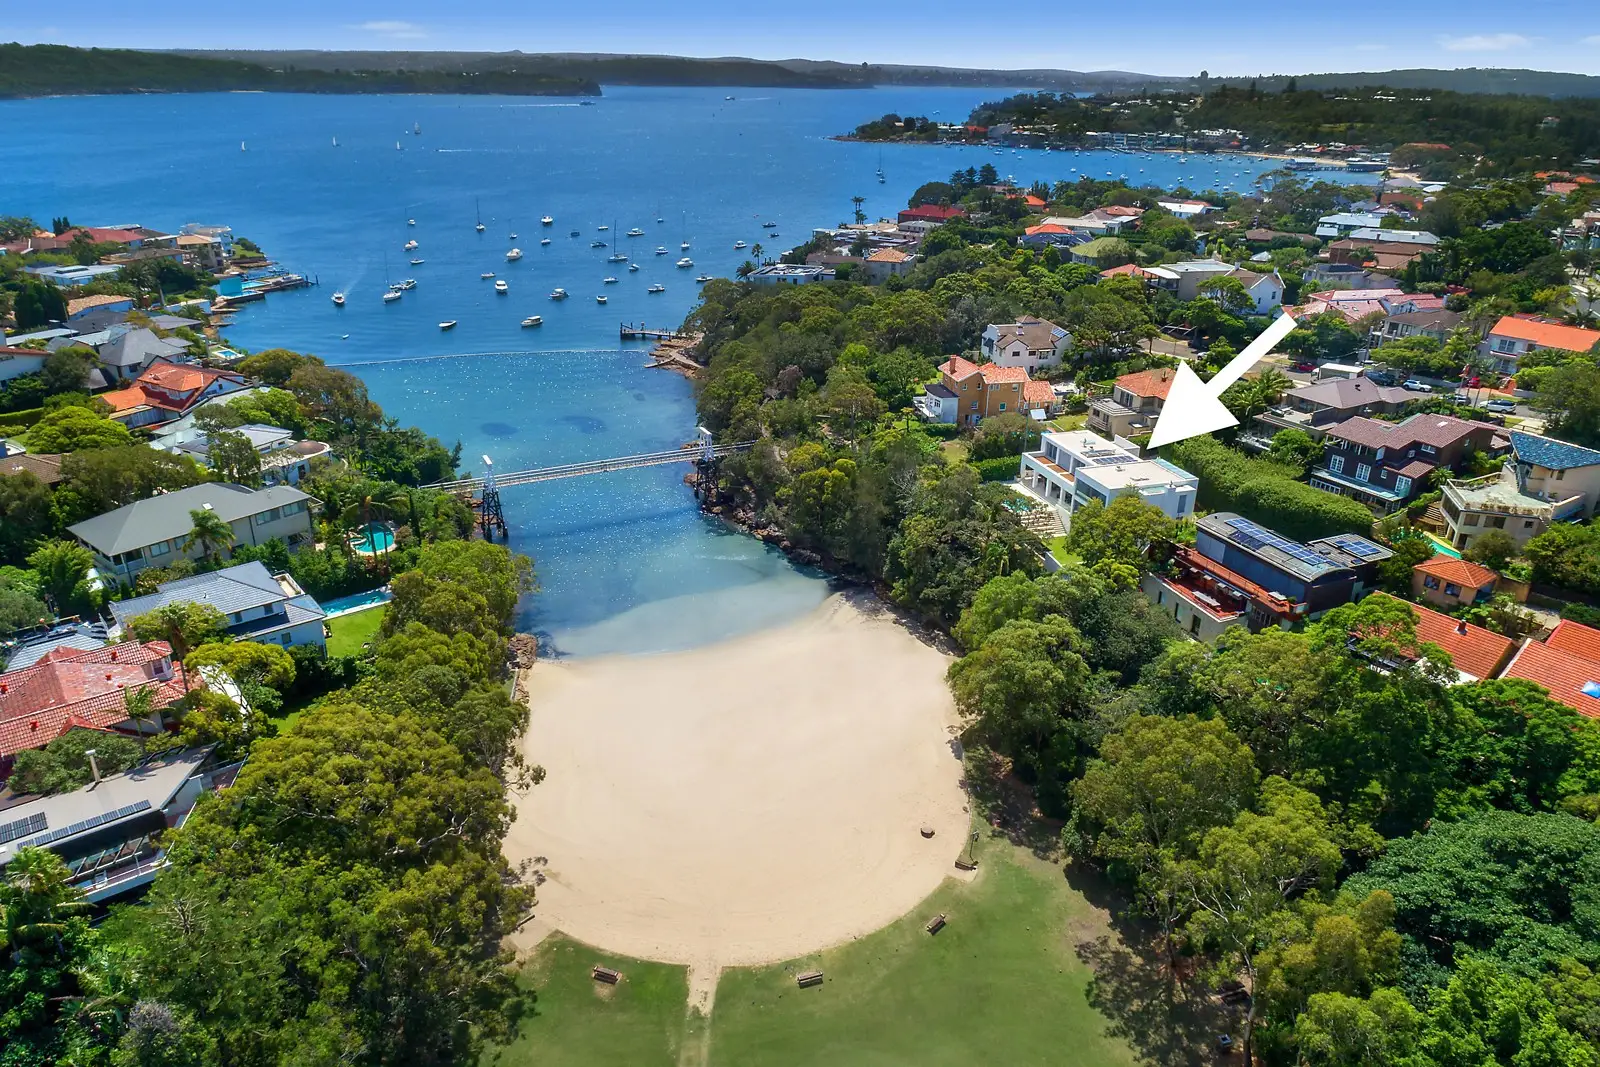 Photo #1: 10 The Crescent, Vaucluse - Sold by Sydney Sotheby's International Realty